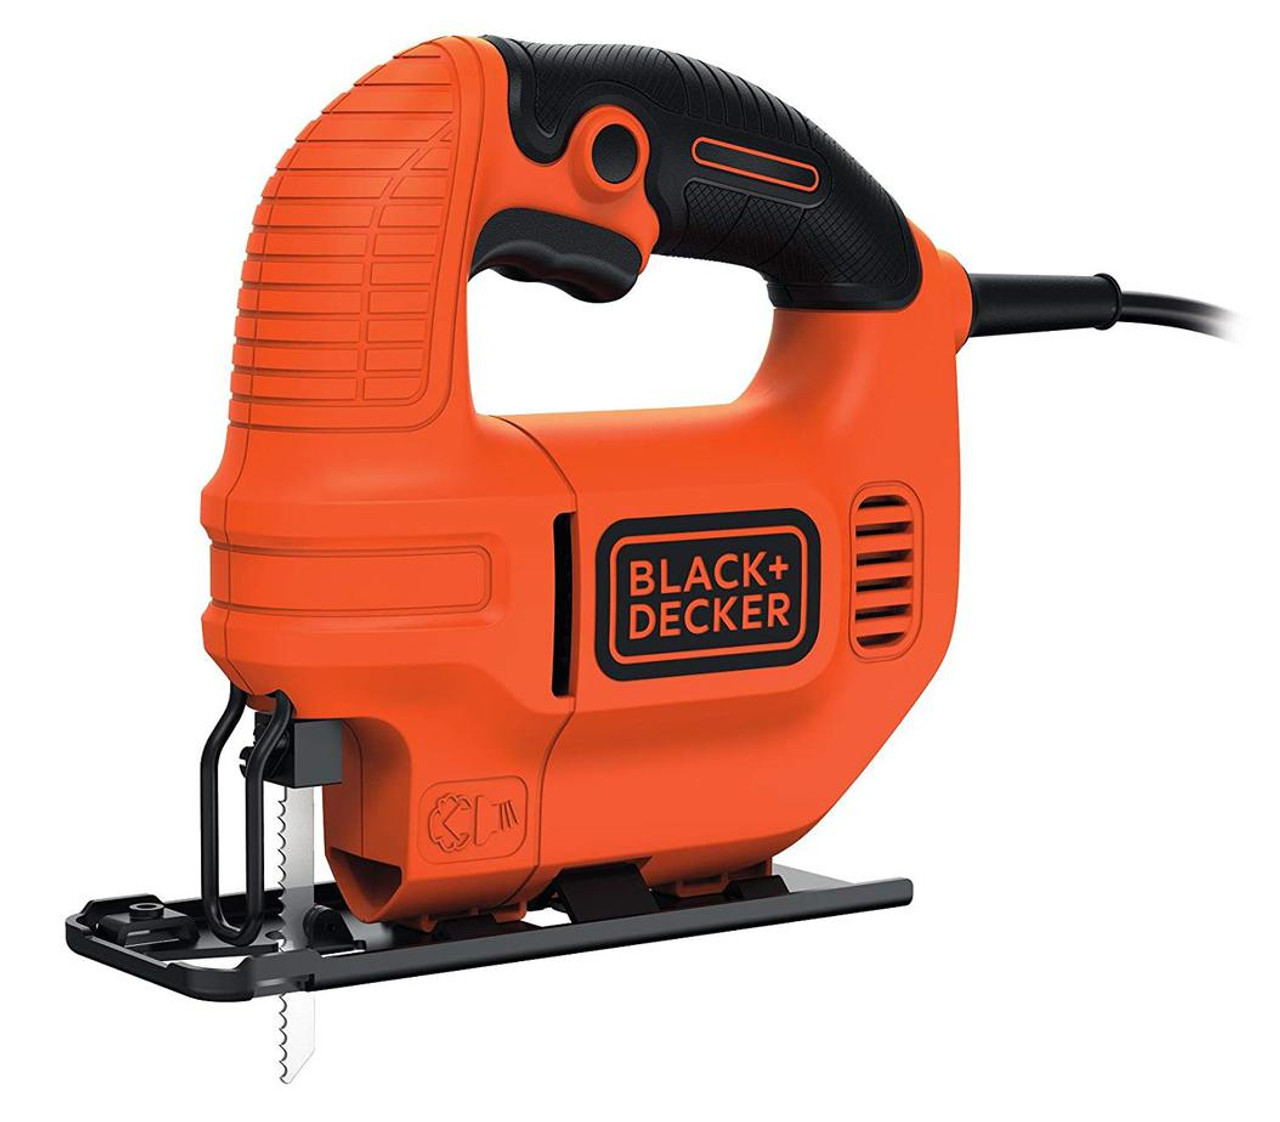 BLACK + DECKER JIGSAW UNBOXING AND REVIEW 